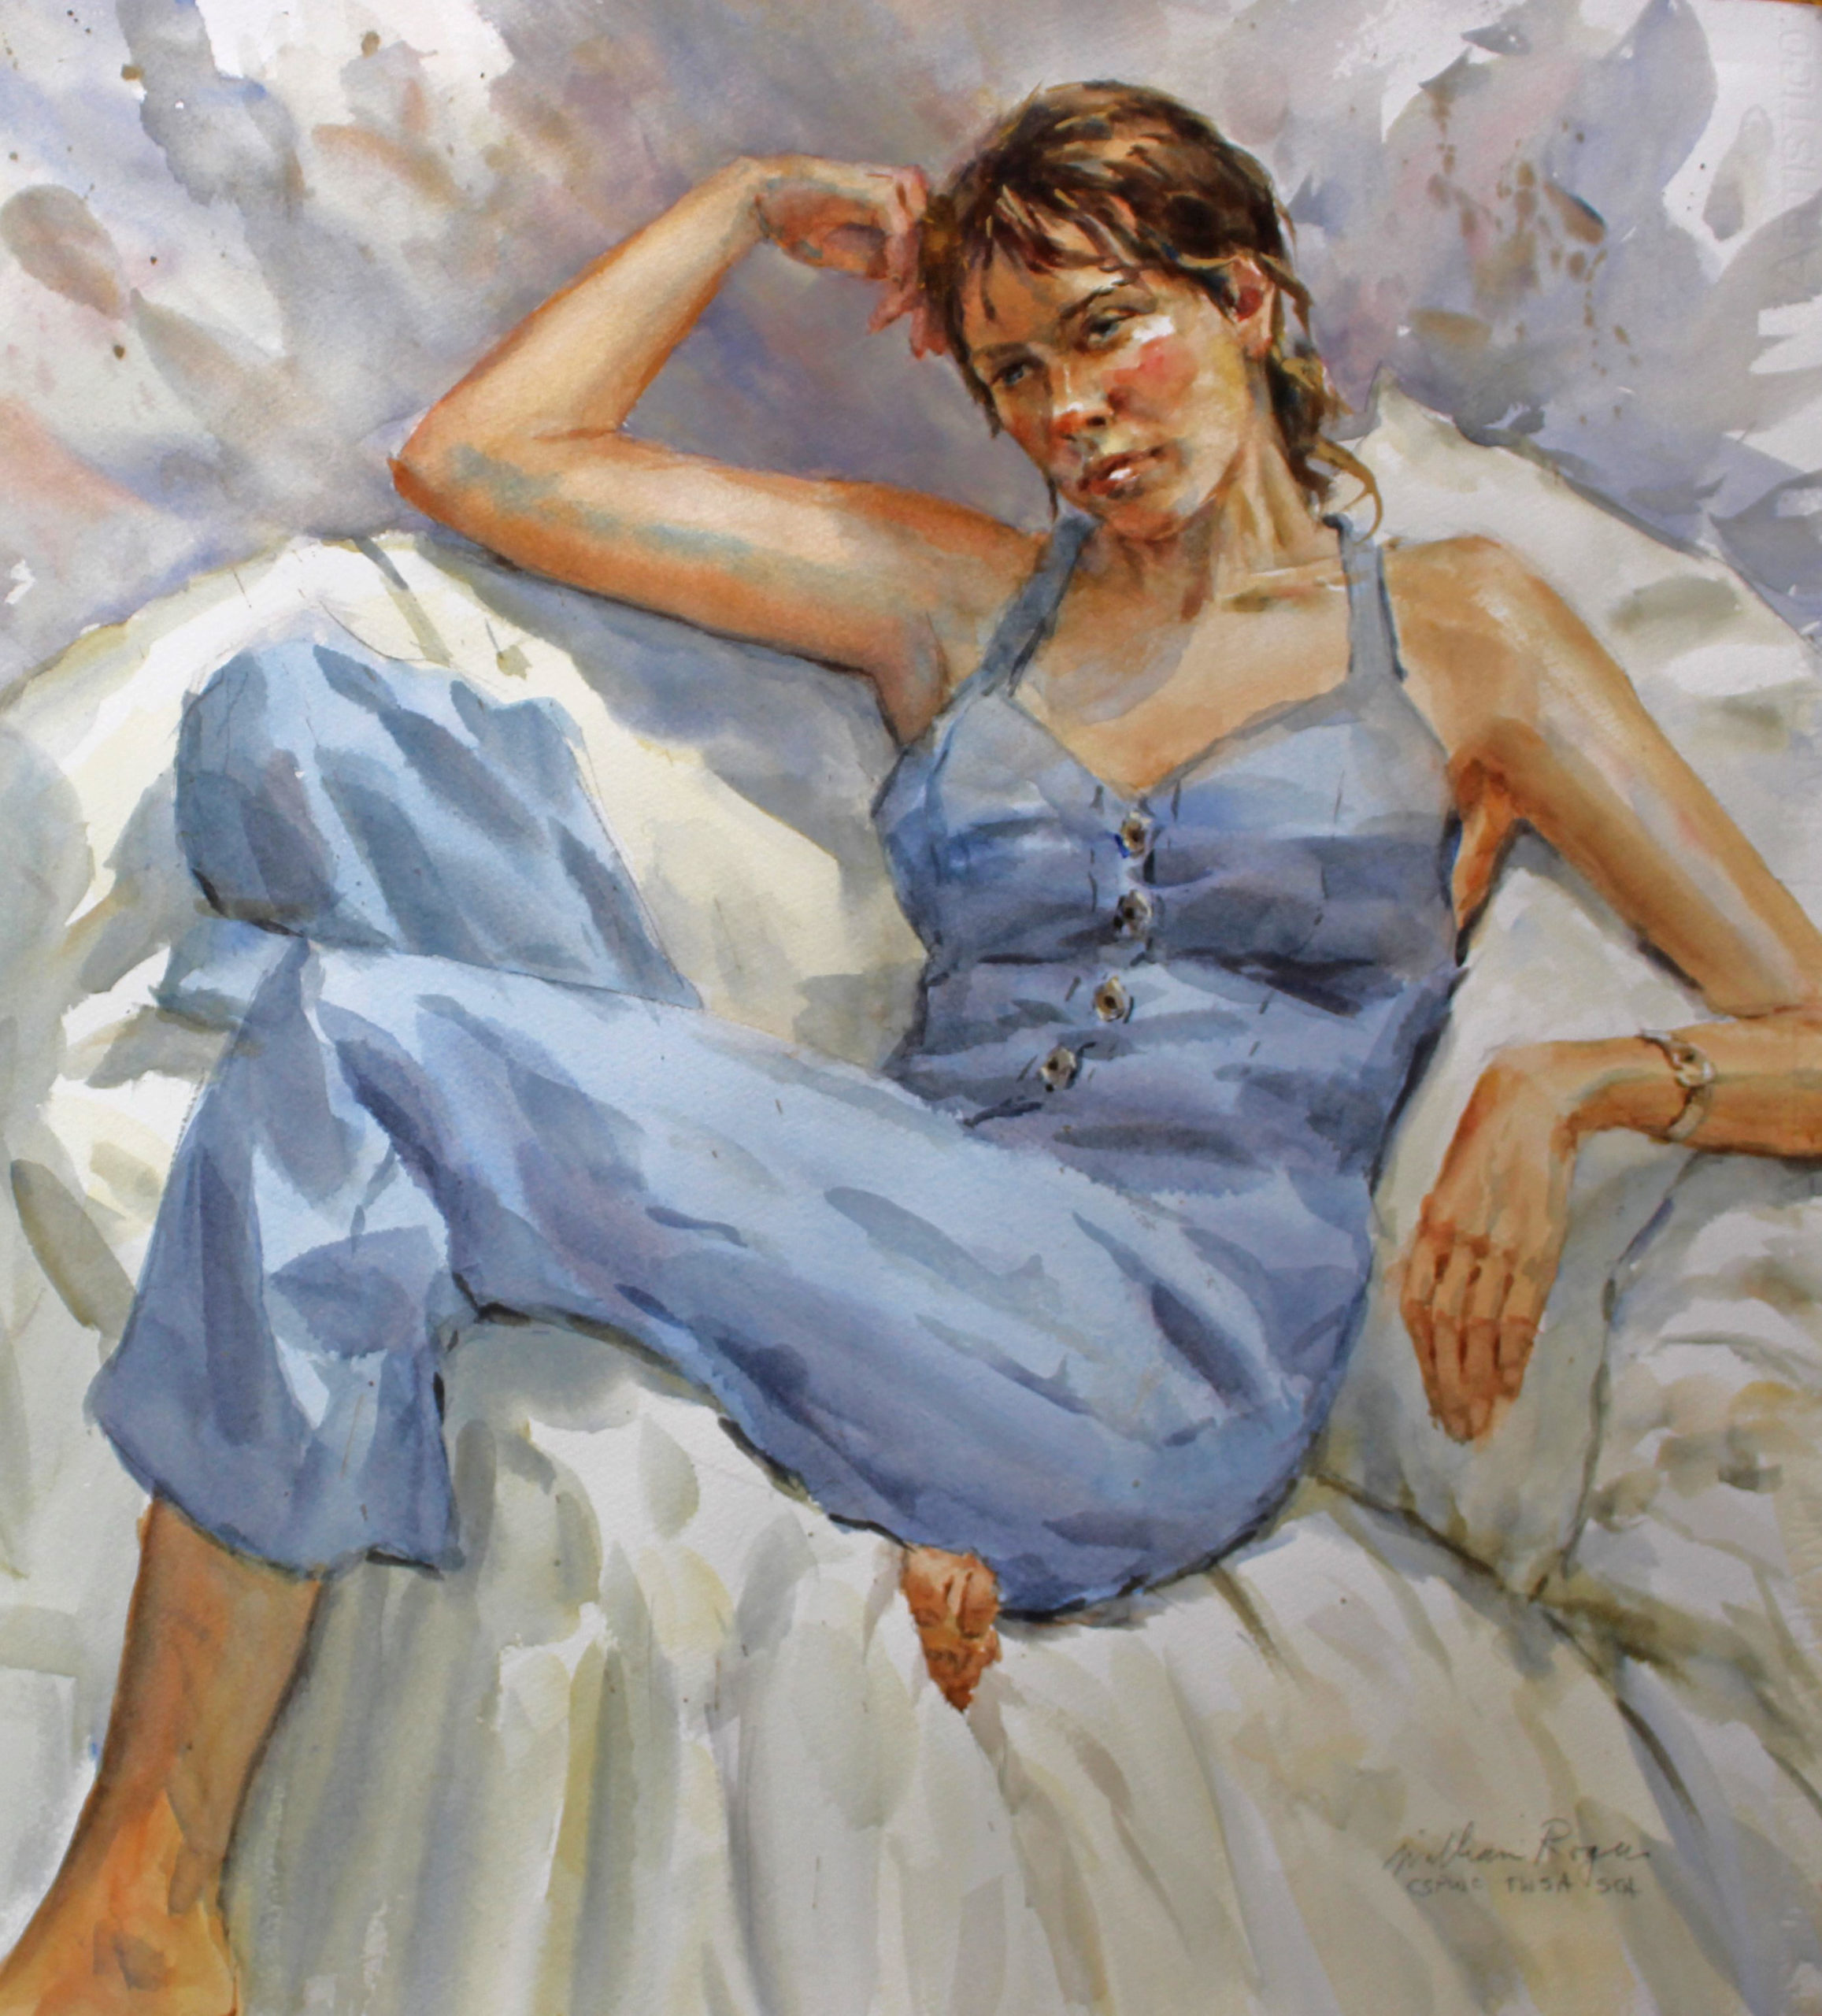 Painting from life - watercolor figurative art